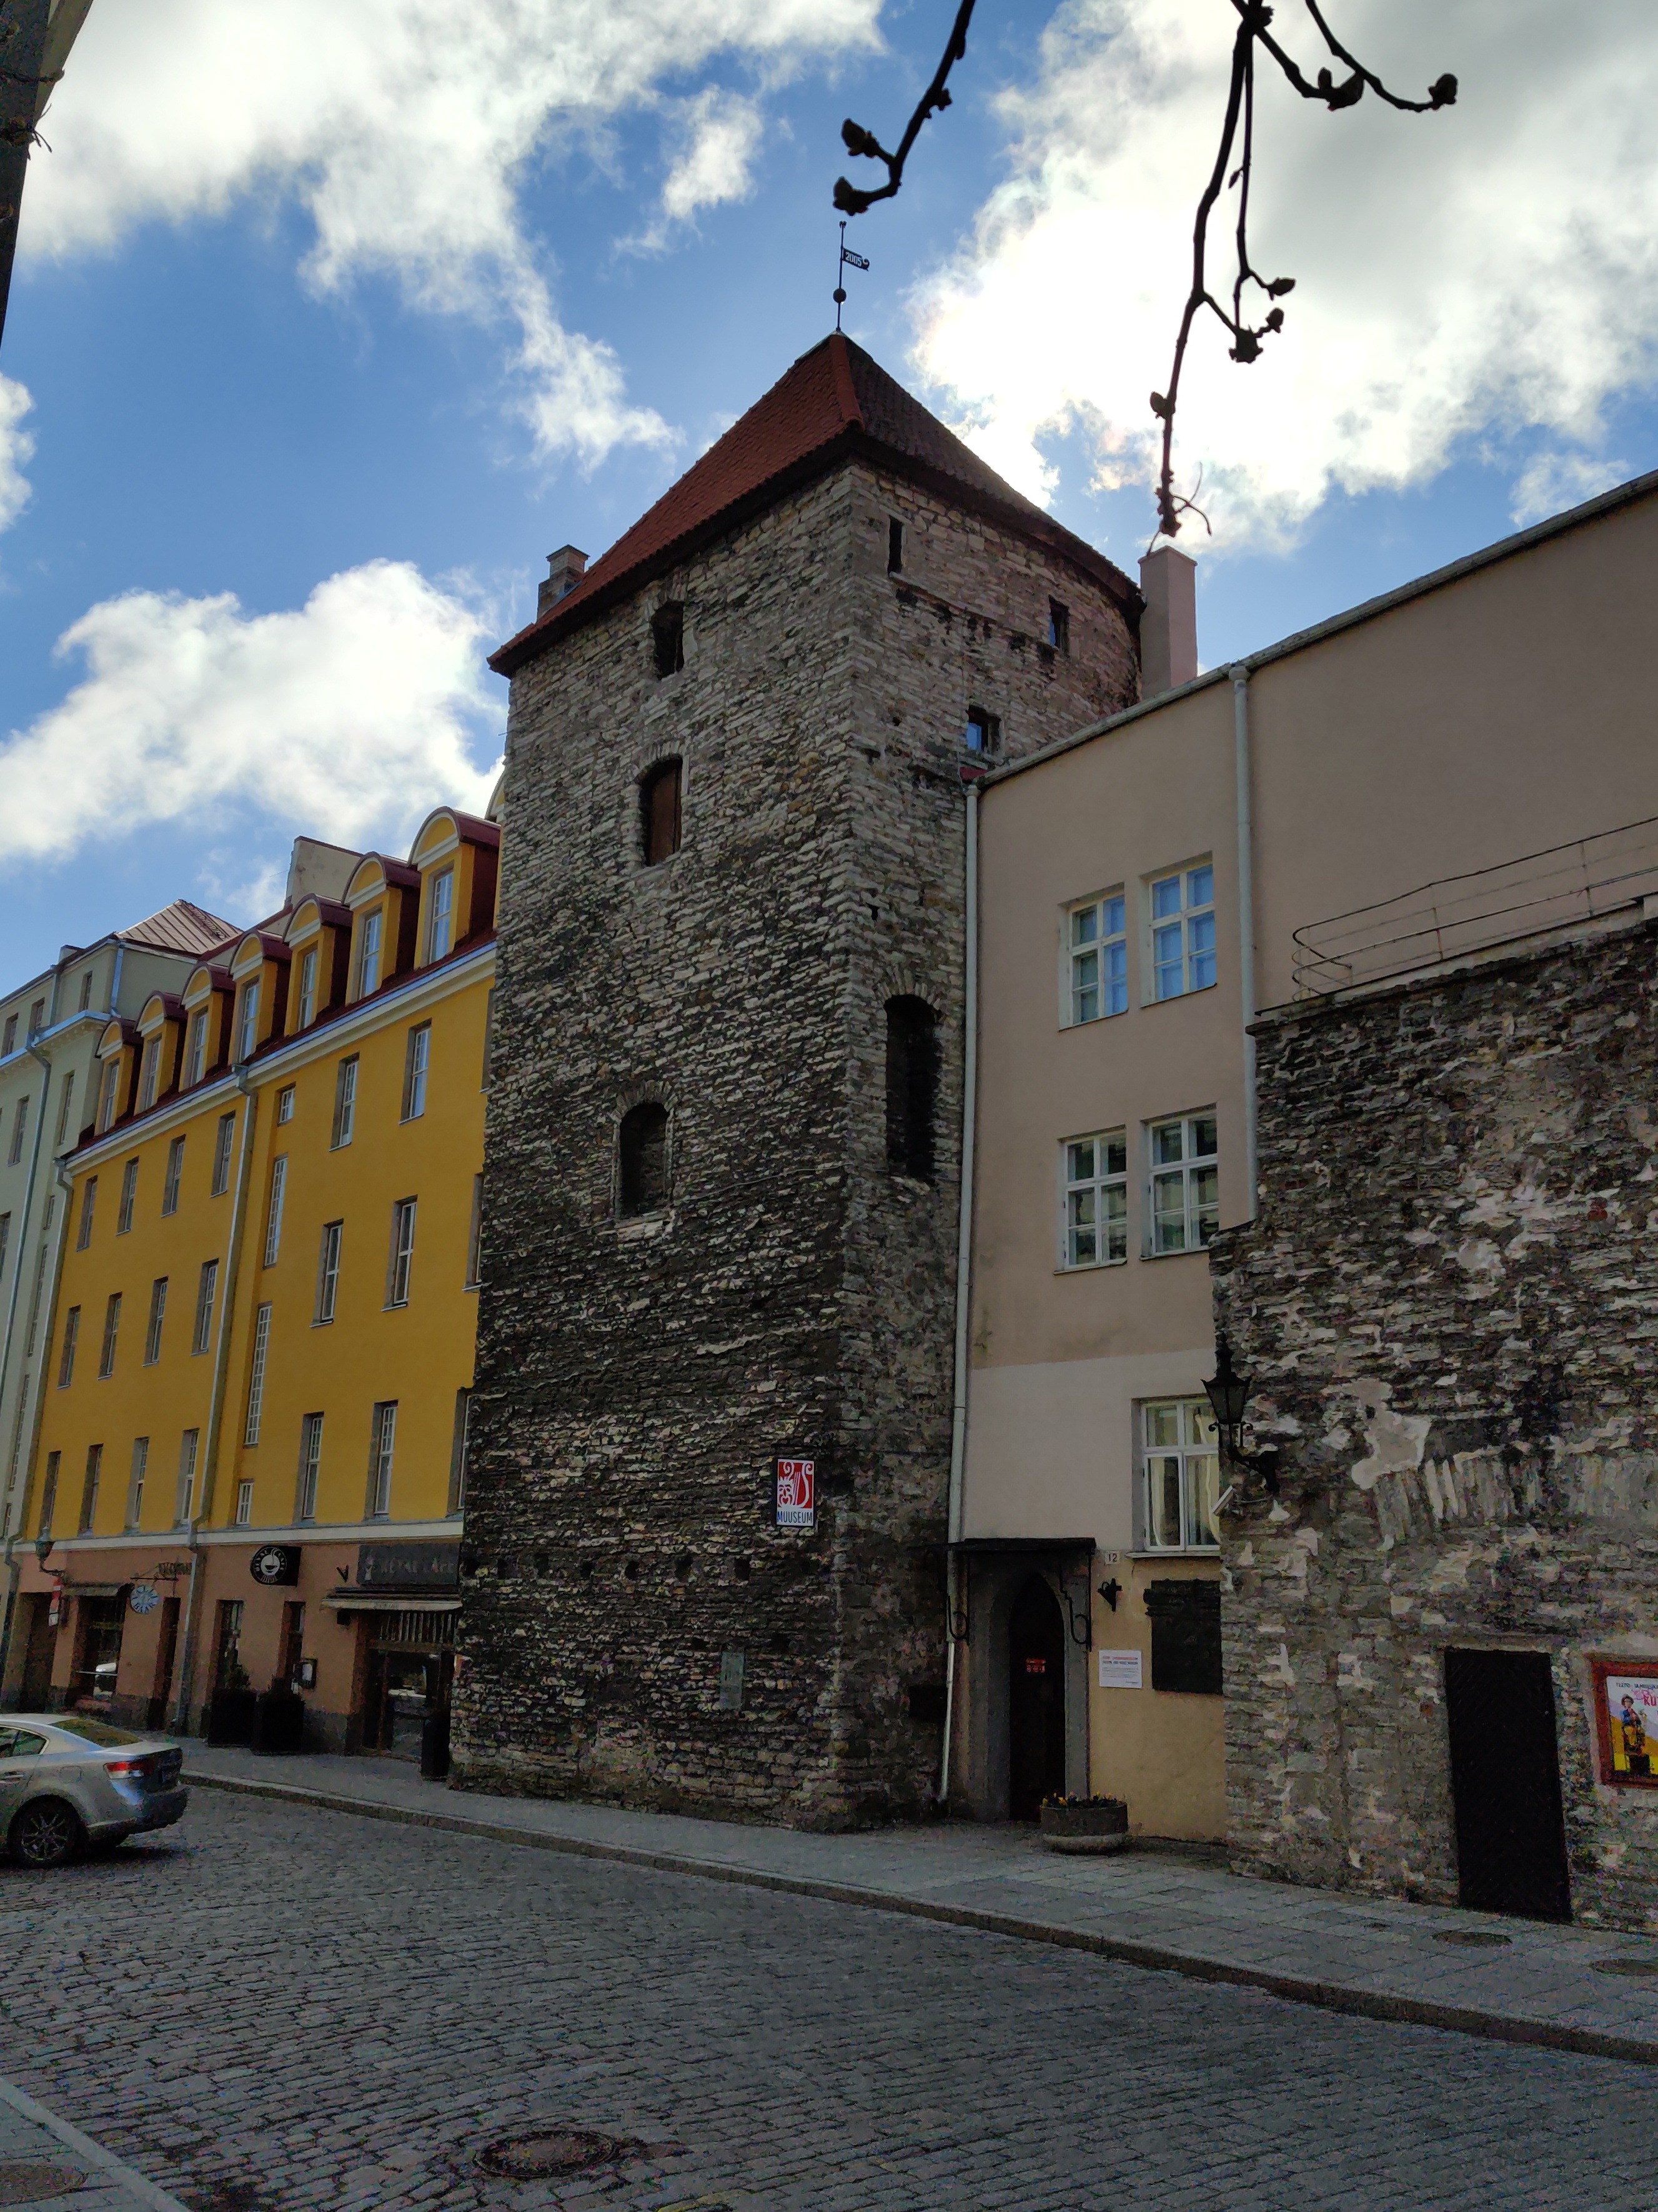 View of the Assauwe Tower located in the Old Town of Tallinn, Müürivahe Street rephoto